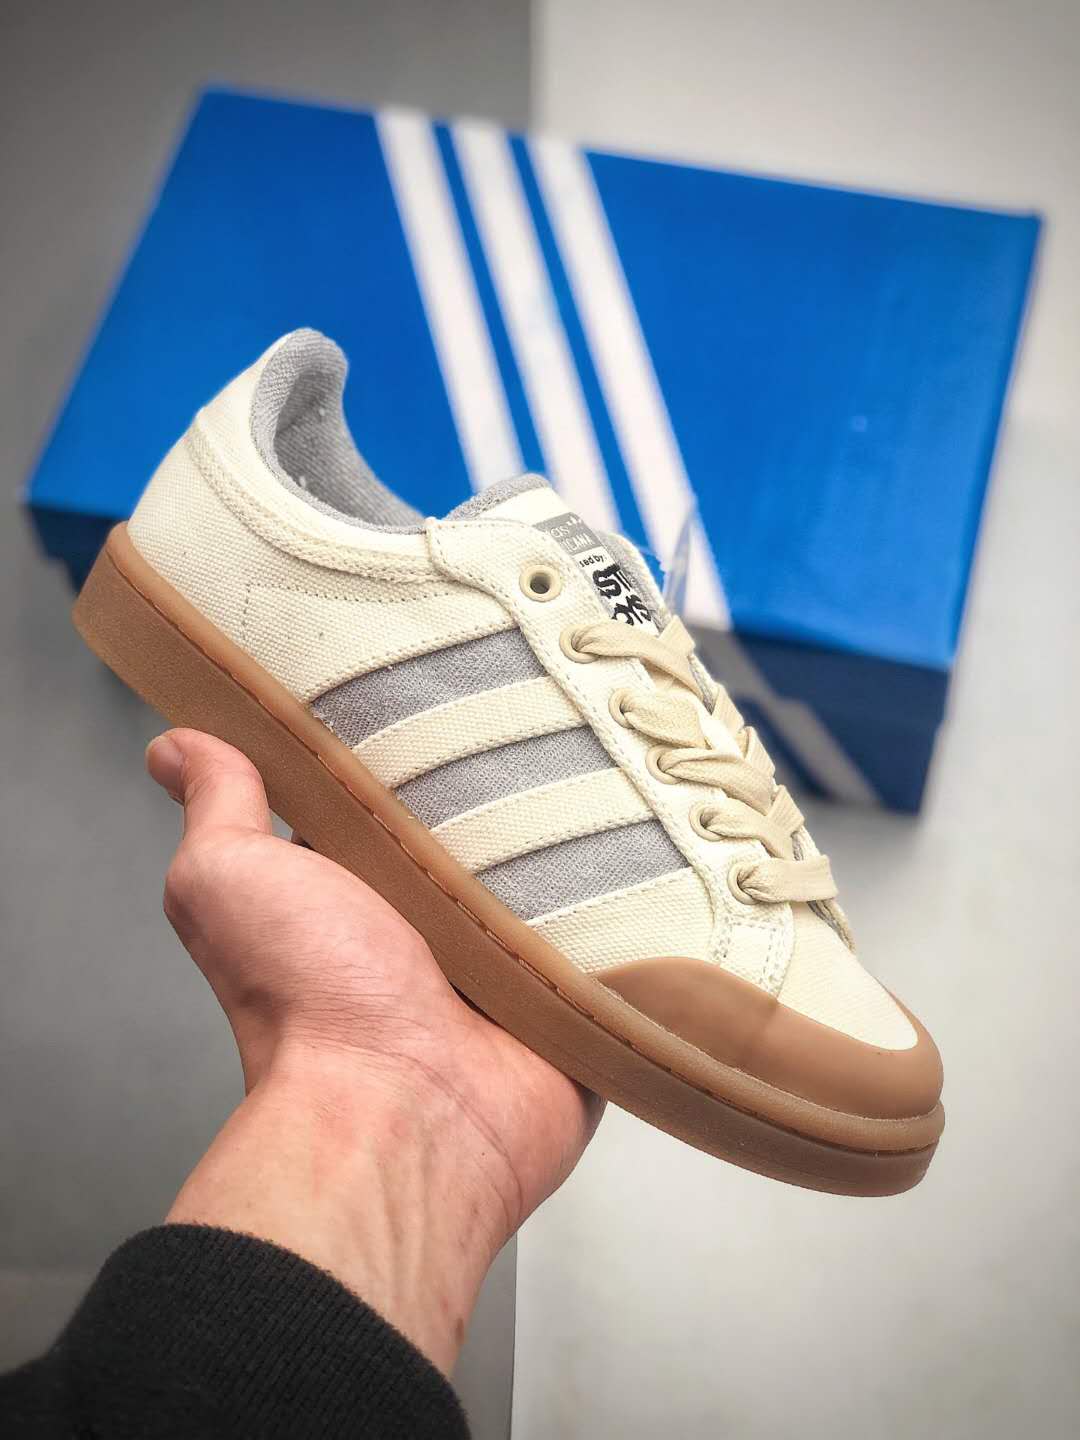 Adidas Beastie Boys x Americana Low 30th Anniversary FV9906 - Limited Edition Sneakers for Collectors